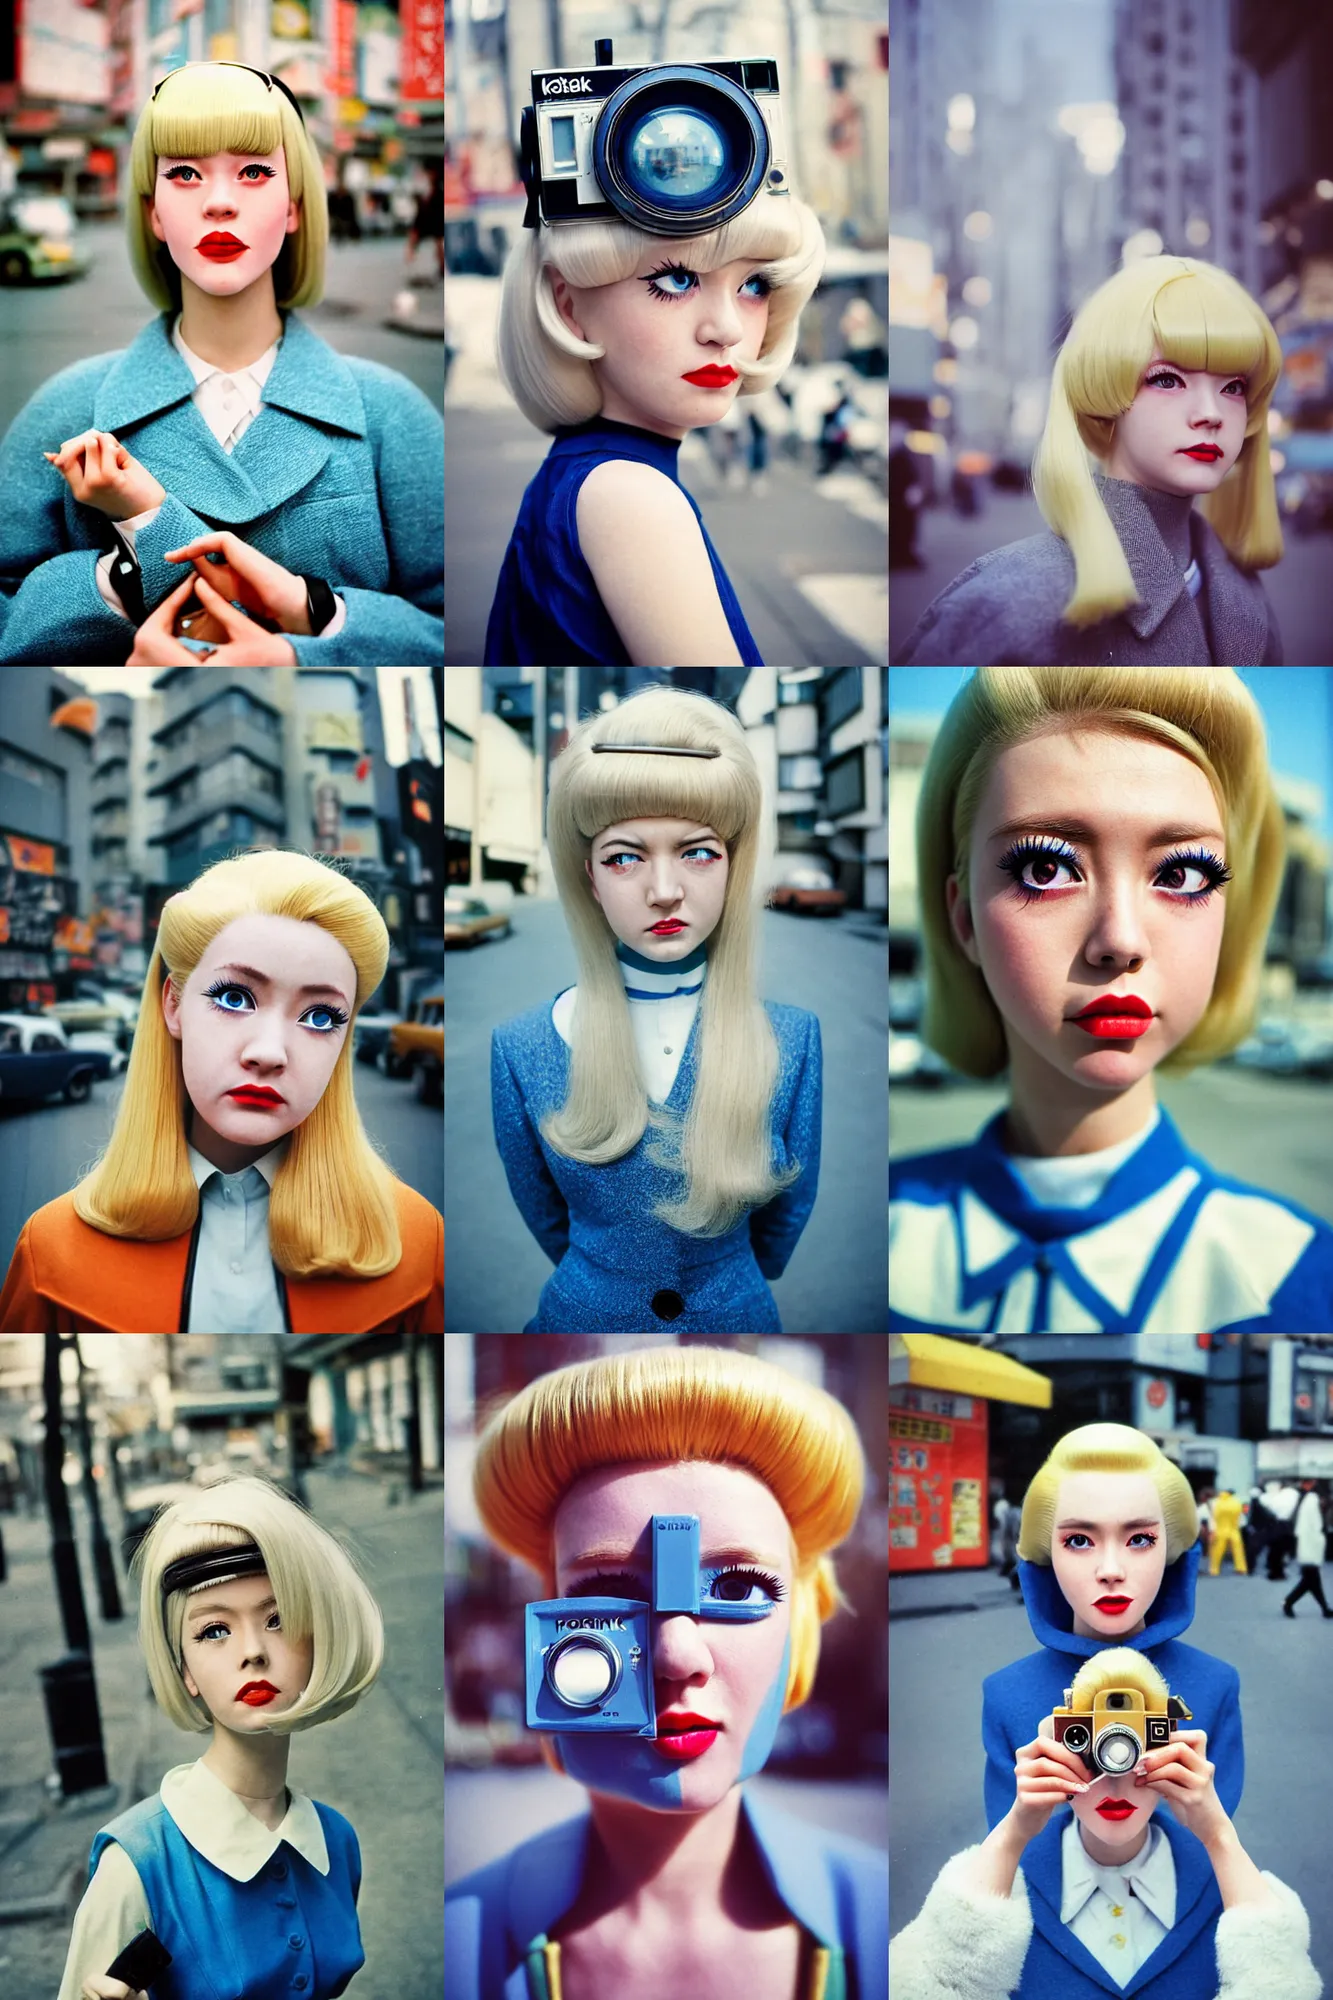 Prompt: Kodak portra 400,8K,highly detailed,tilt shift background: beautiful three point perspective extreme closeup portrait photo in style of 1960s frontiers in cosplay retrofuturism tokyo seinen manga street photography fashion edition, highly detailed, focus on pursed lips;blonde hair;blue eyes, clear eyes,mirror background, soft lighting